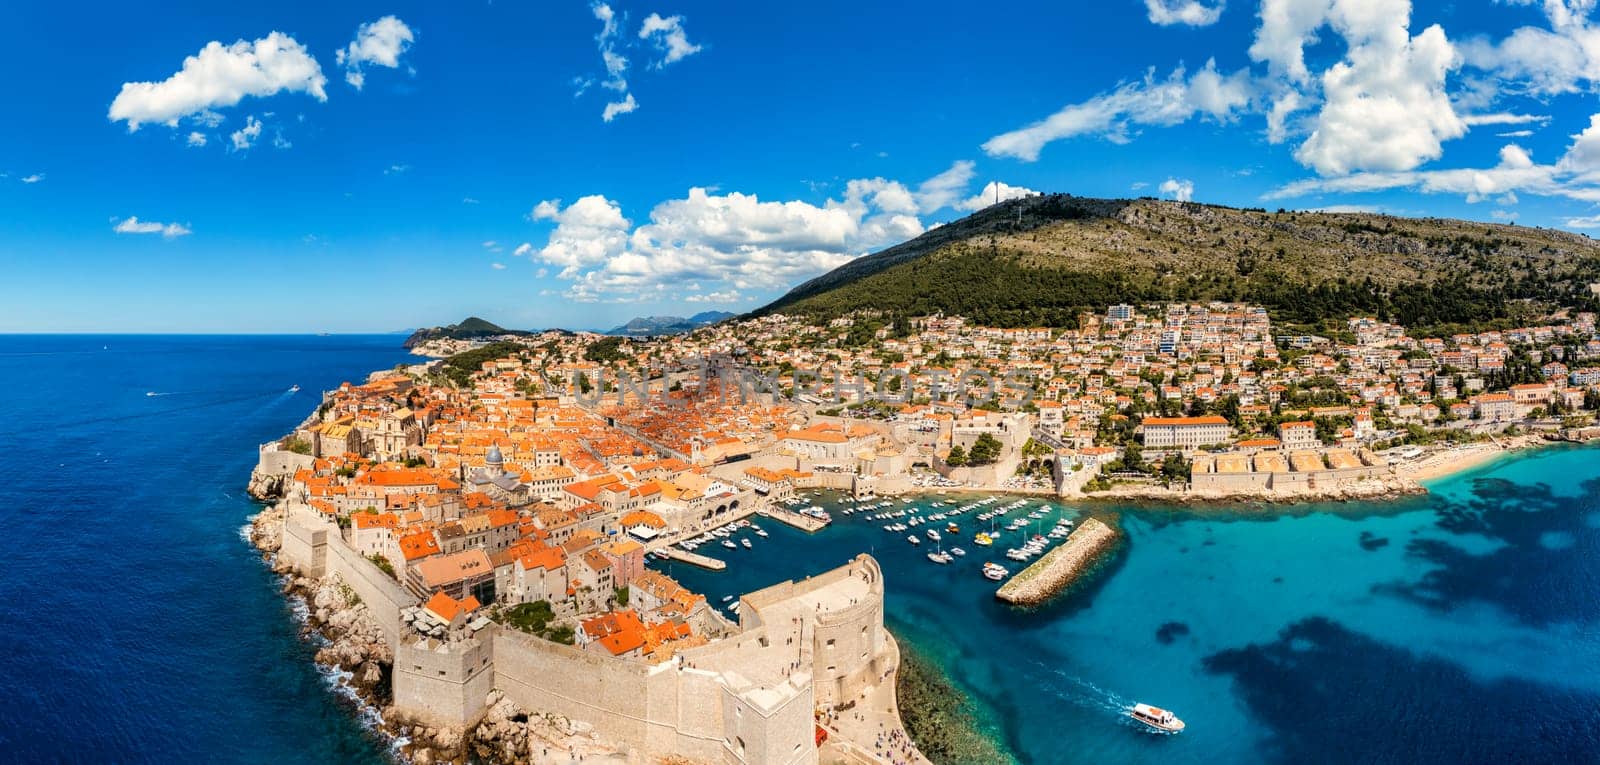 Dubrovnik a city in southern Croatia fronting the Adriatic Sea, Europe. Old city center of famous town Dubrovnik, Croatia. Picturesque view on Dubrovnik old town (medieval Ragusa) and Dalmatian Coast.